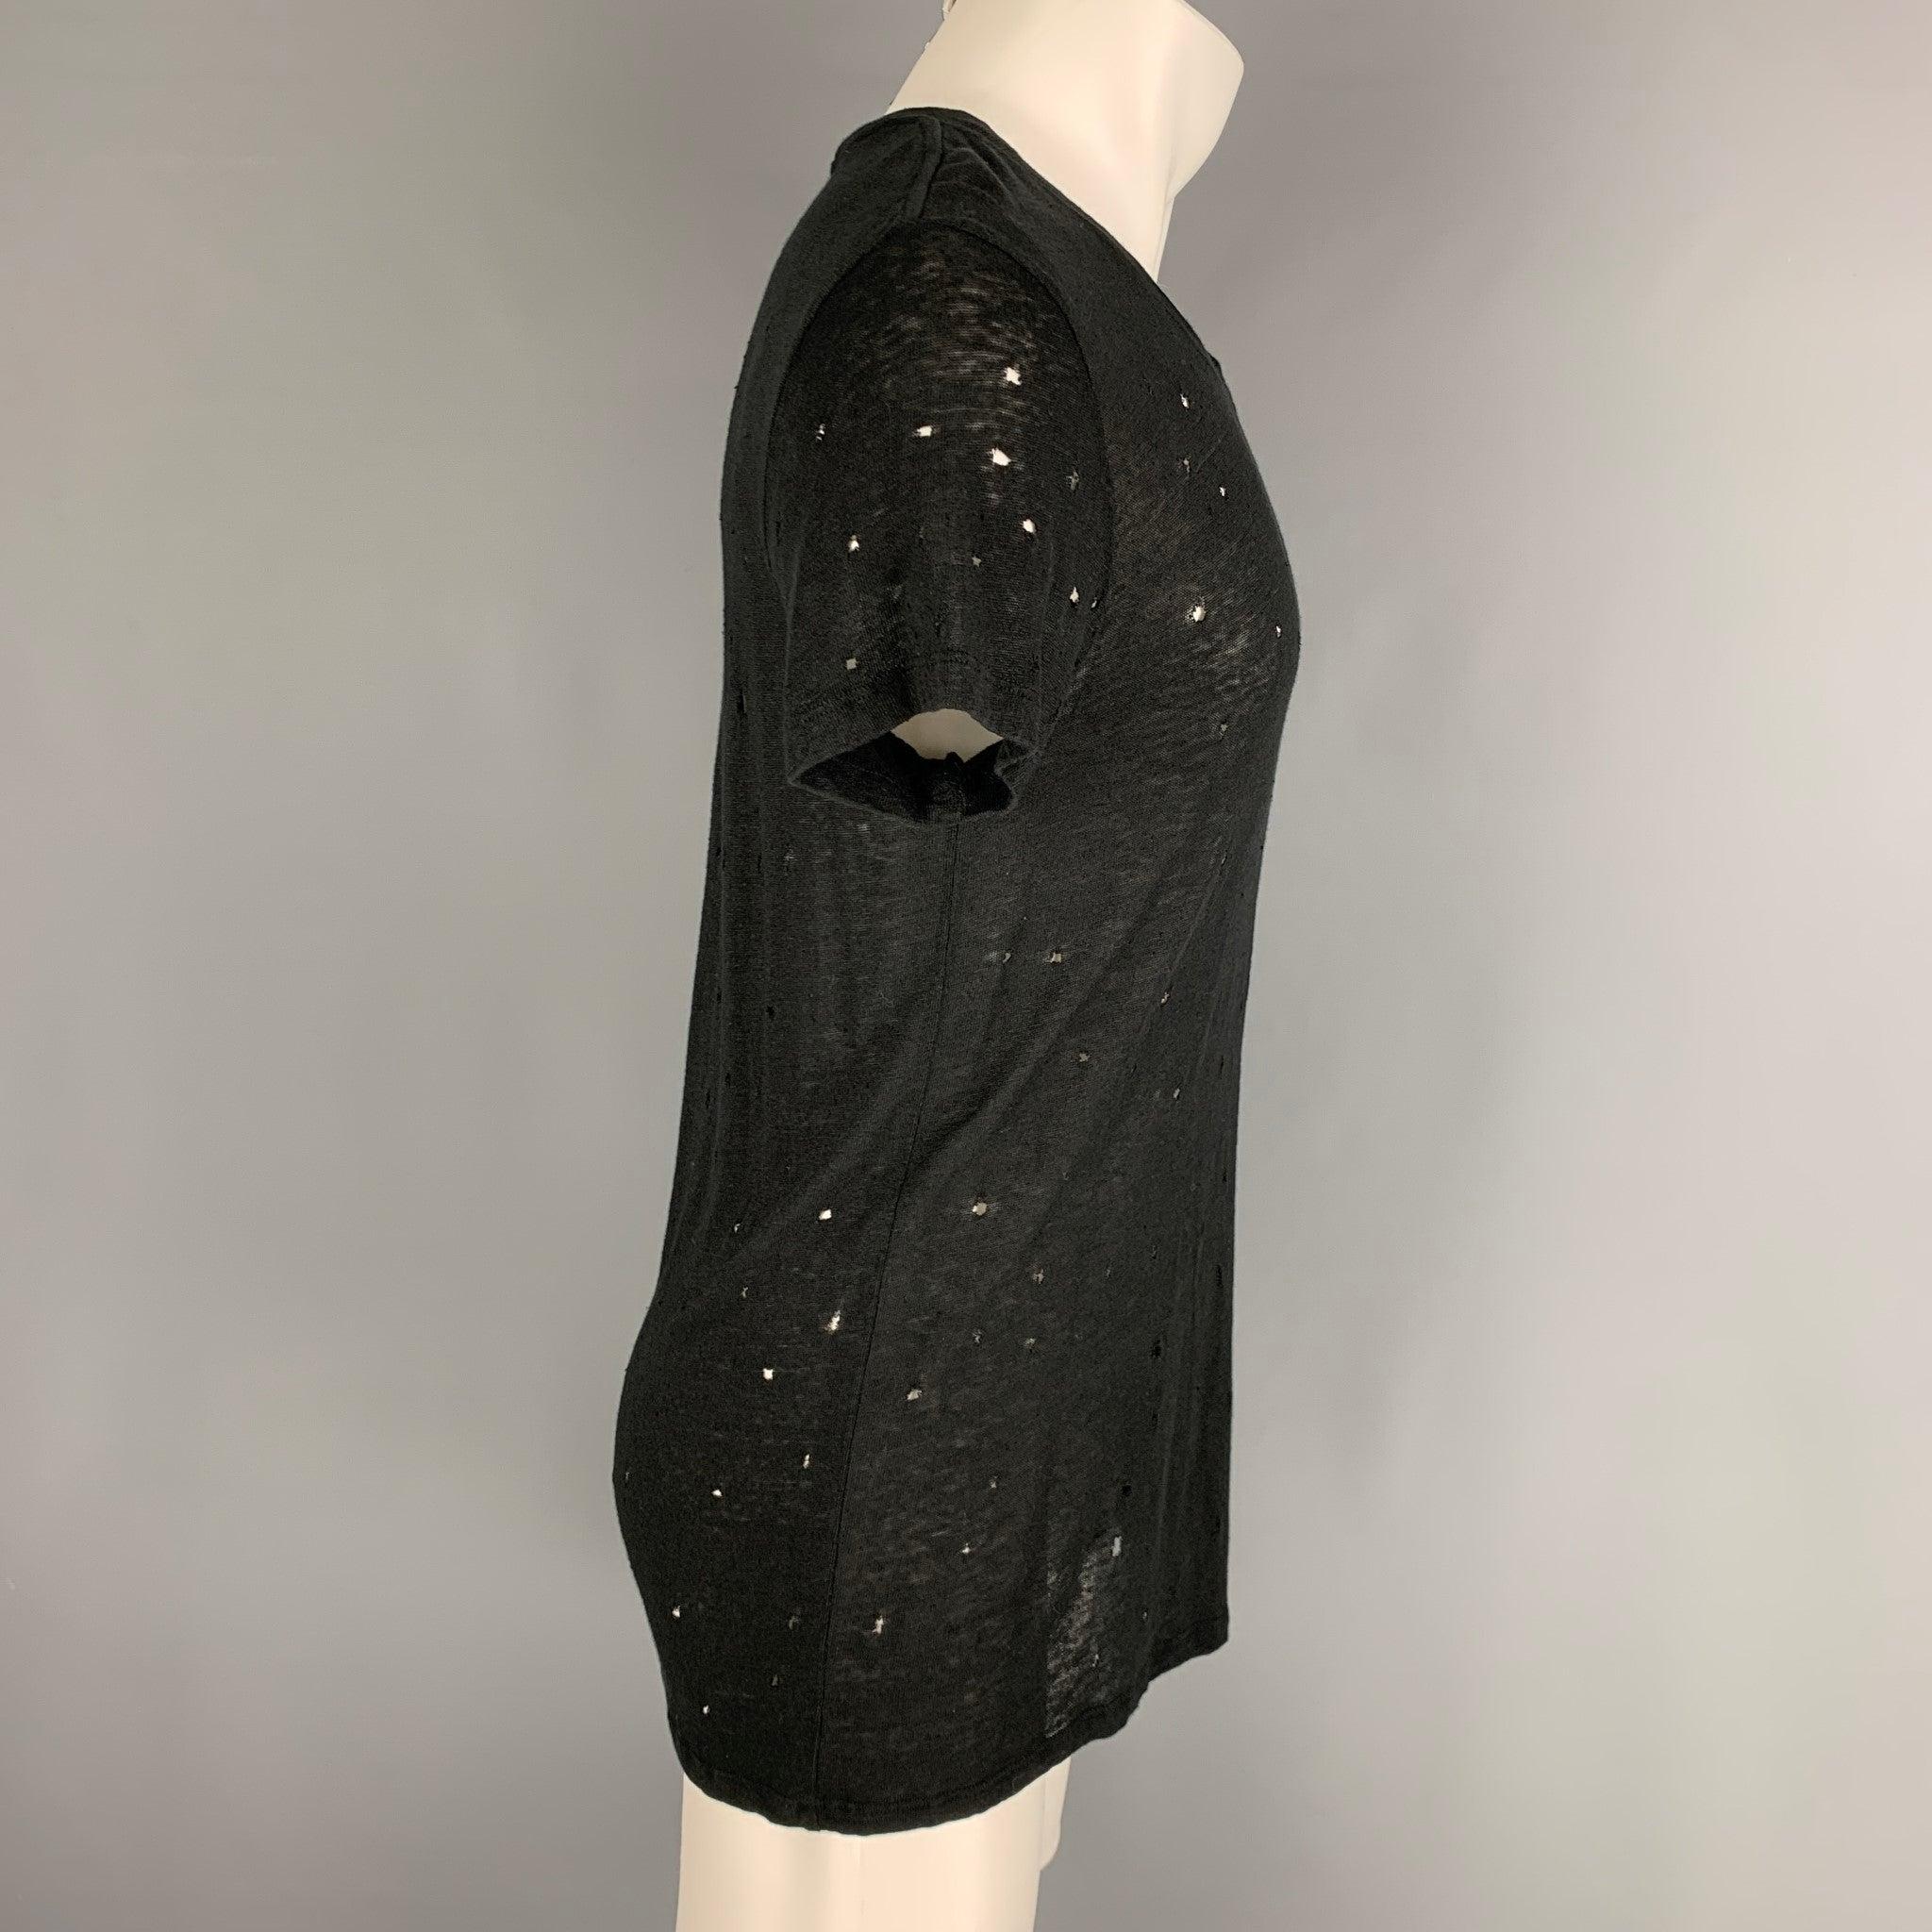 IRO 'Clay' t-shirt comes in a black linen featuring distressed details throughout and a crew-neck. Made in Portugal.Very Good Pre-Owned Condition. 

Marked:   XS 

Measurements: 
 
Shoulder: 18 inches Chest: 46 inches 2Sleeve: 8 inches Length: 26.5